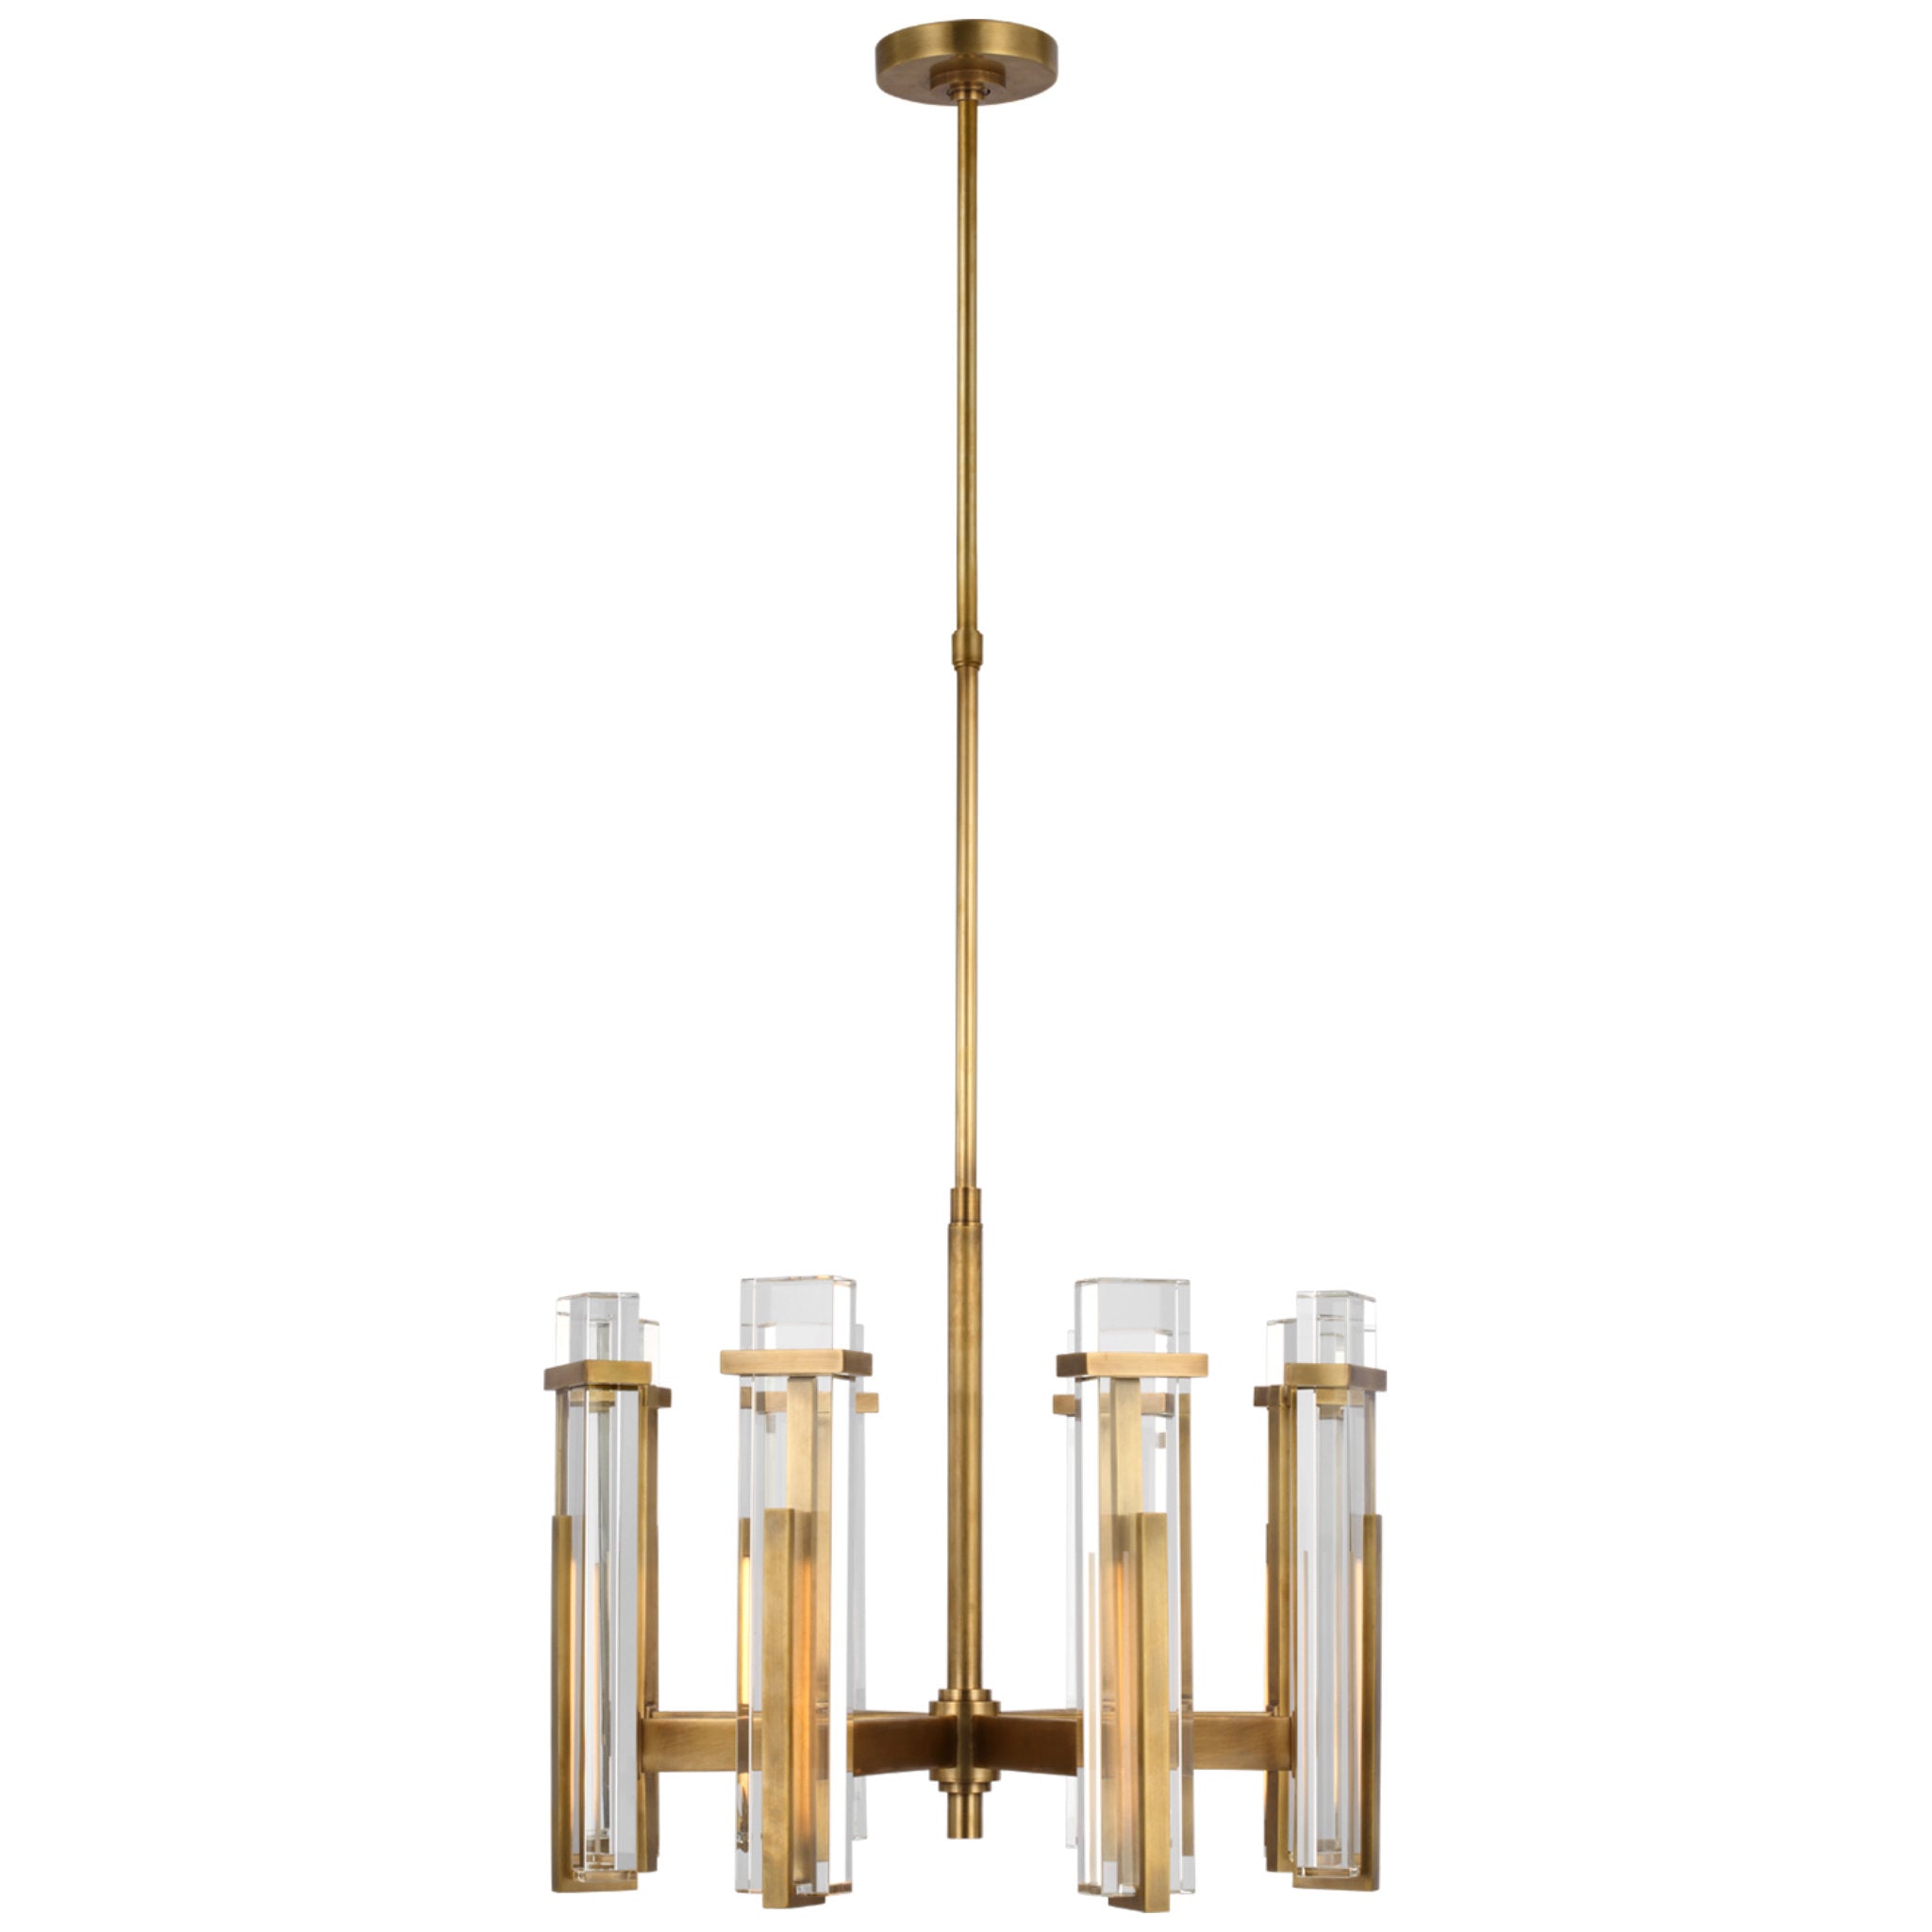 Ian K. Fowler Malik Medium Chandelier in Hand-Rubbed Antique Brass with Crystal